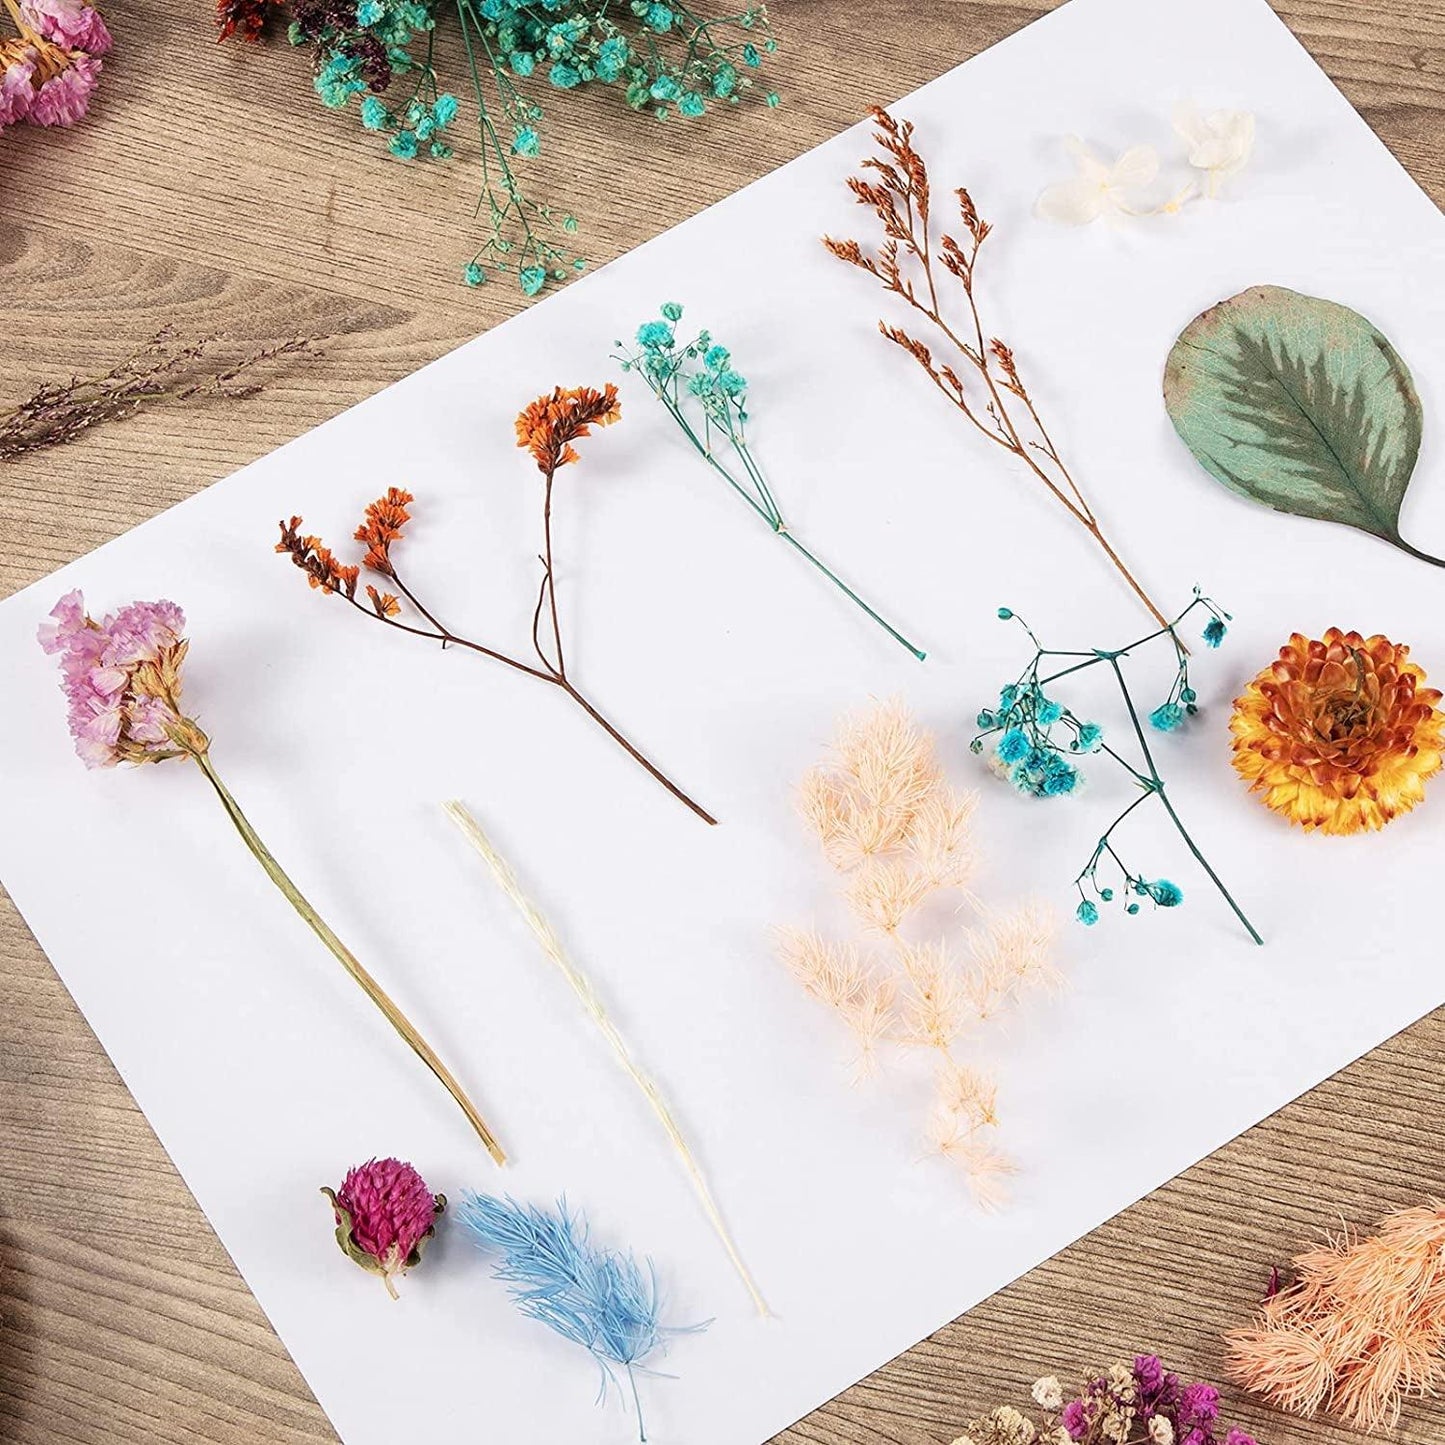 2 Random Boxes Pressed Flowers Dried Pressed Flowers for Resin Real Dried Flower Leaves Mixed Pressed Flower Colorful Real Dried Flower with Tweezers for Resin Jewelry DIY Making Wedding - WoodArtSupply